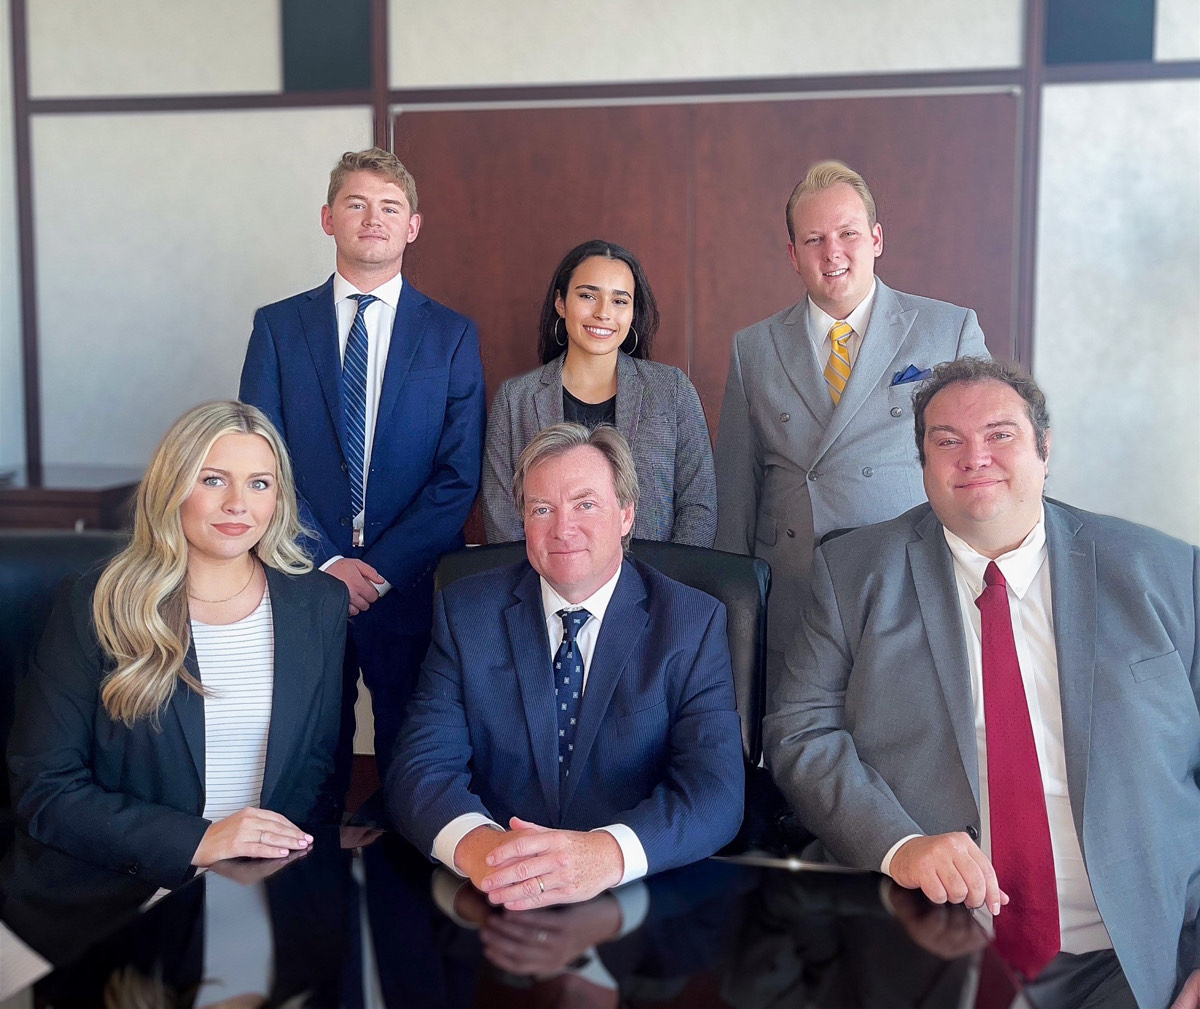 Law Offices of Kevin E. O'Reilly - Attorneys and Staff